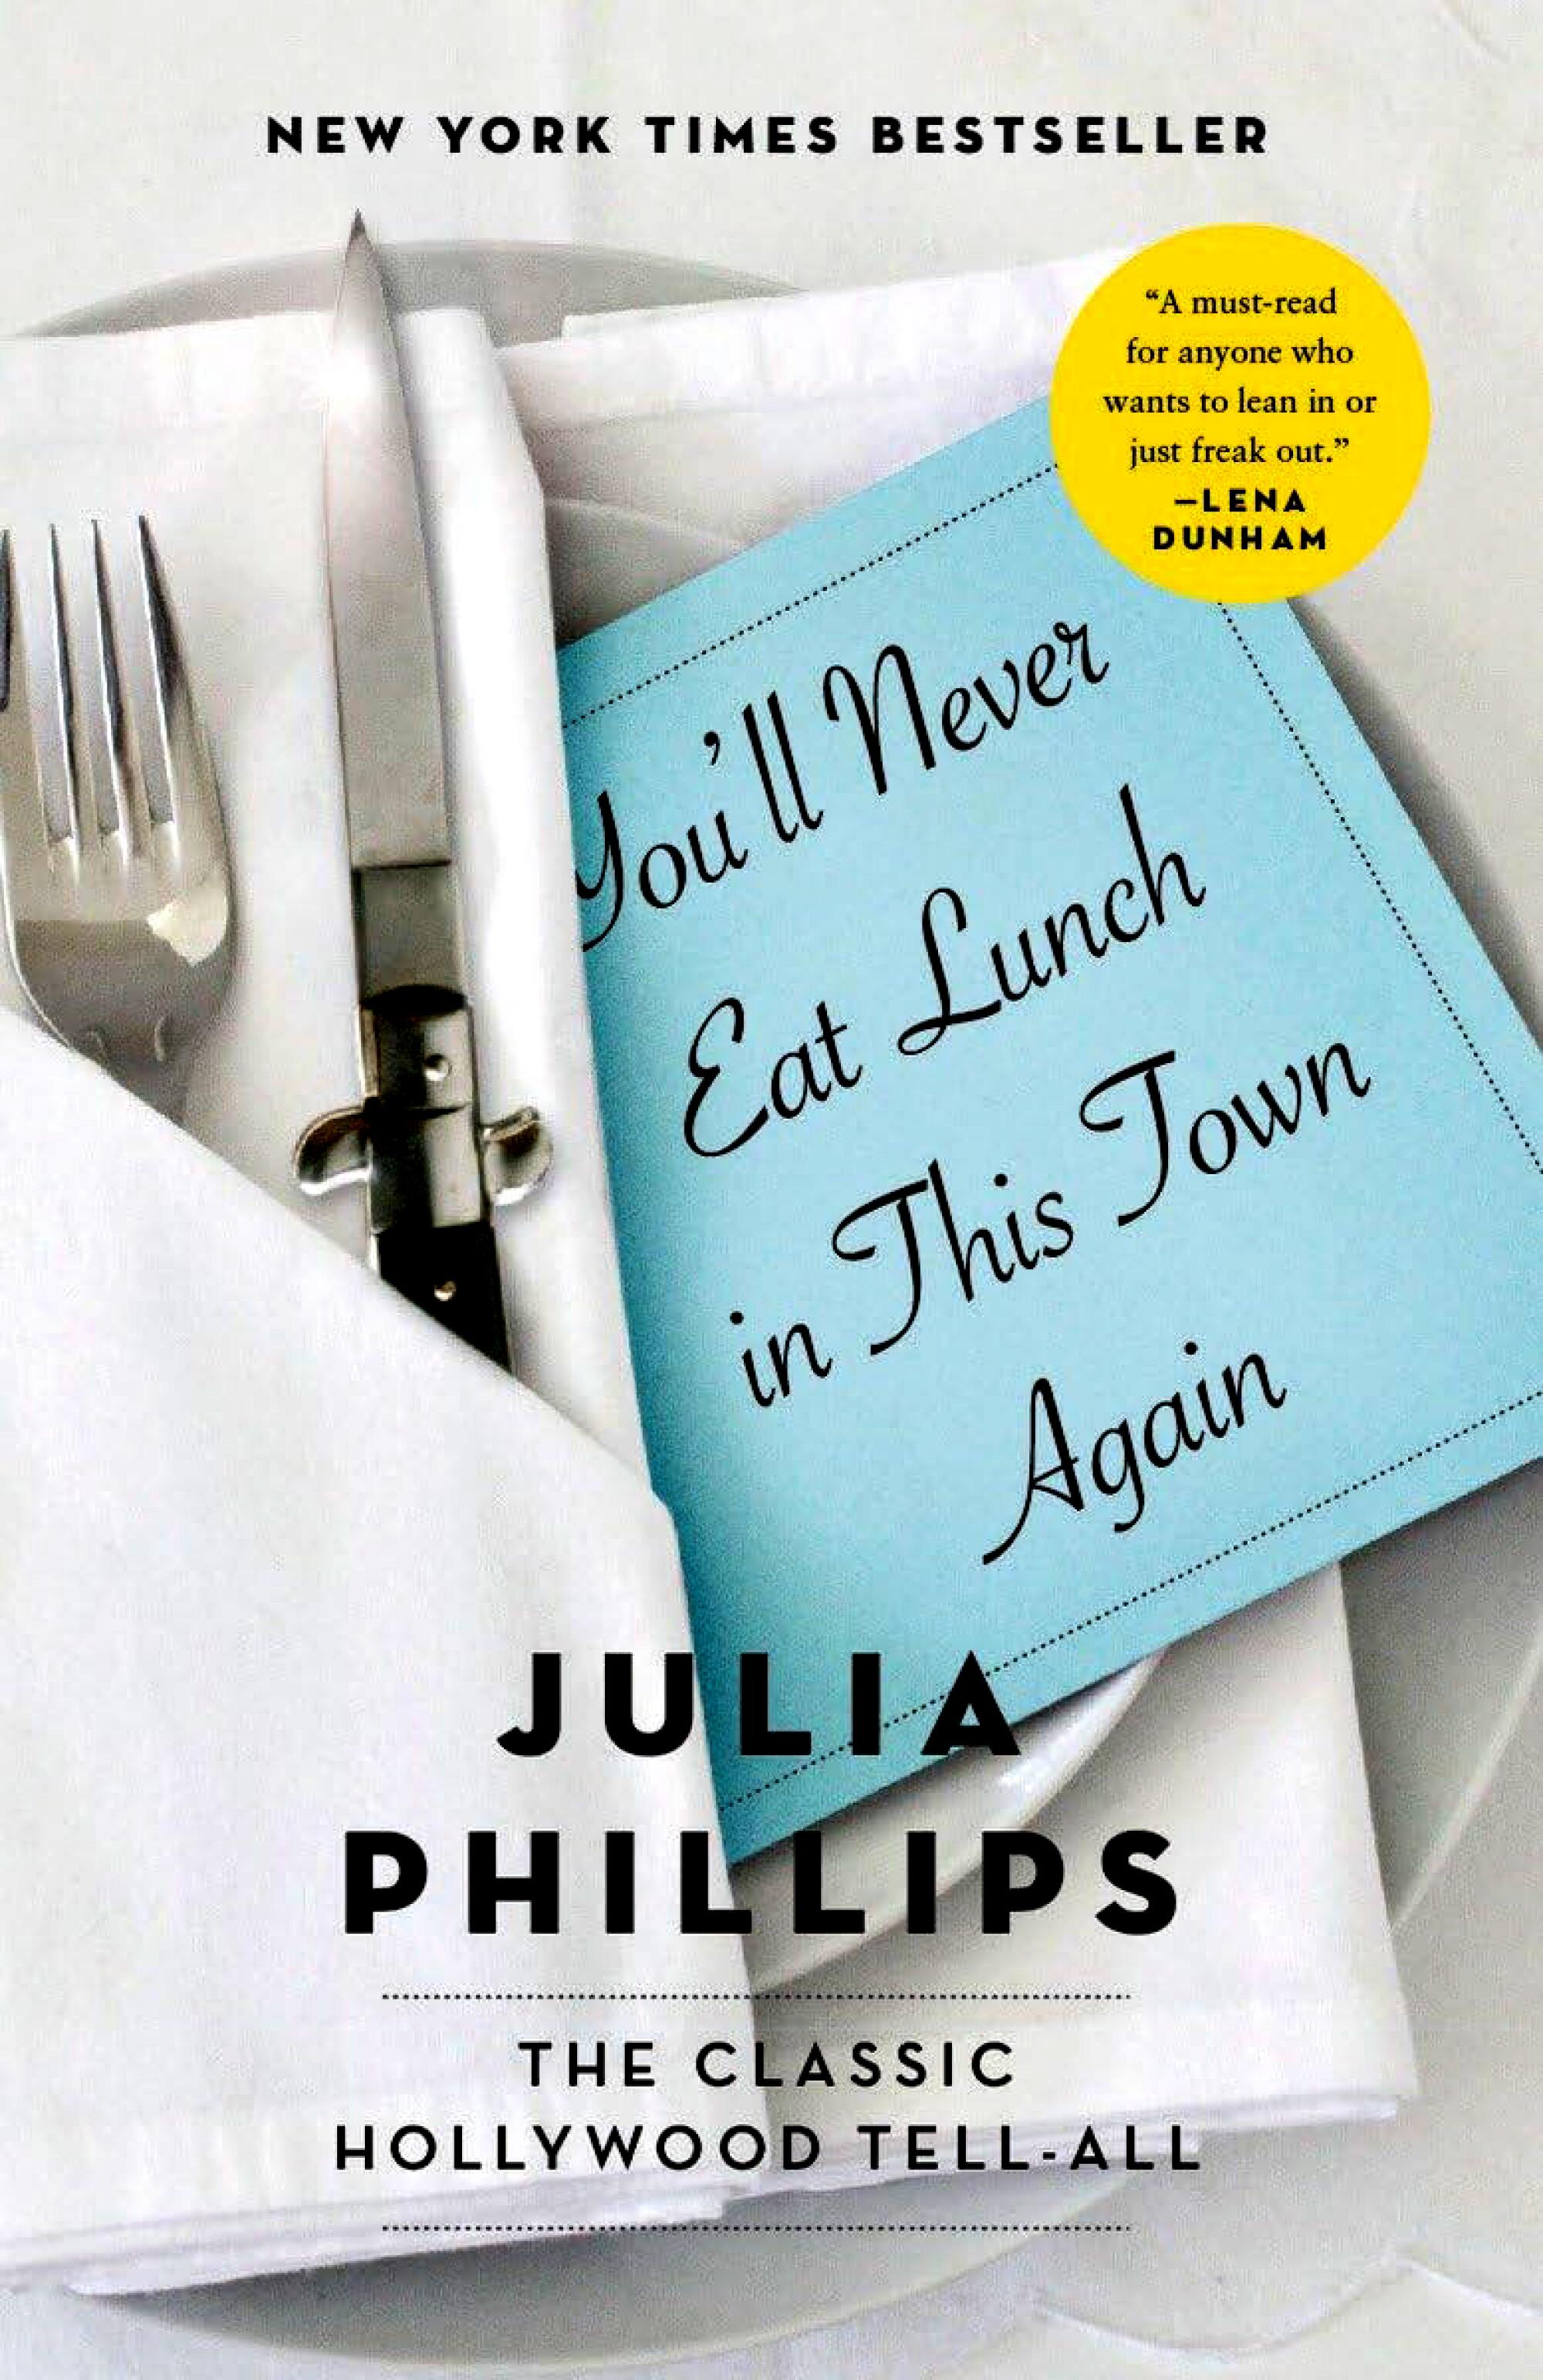 "You'll Never Eat Lunch in This Town Again" by Julia Phillips